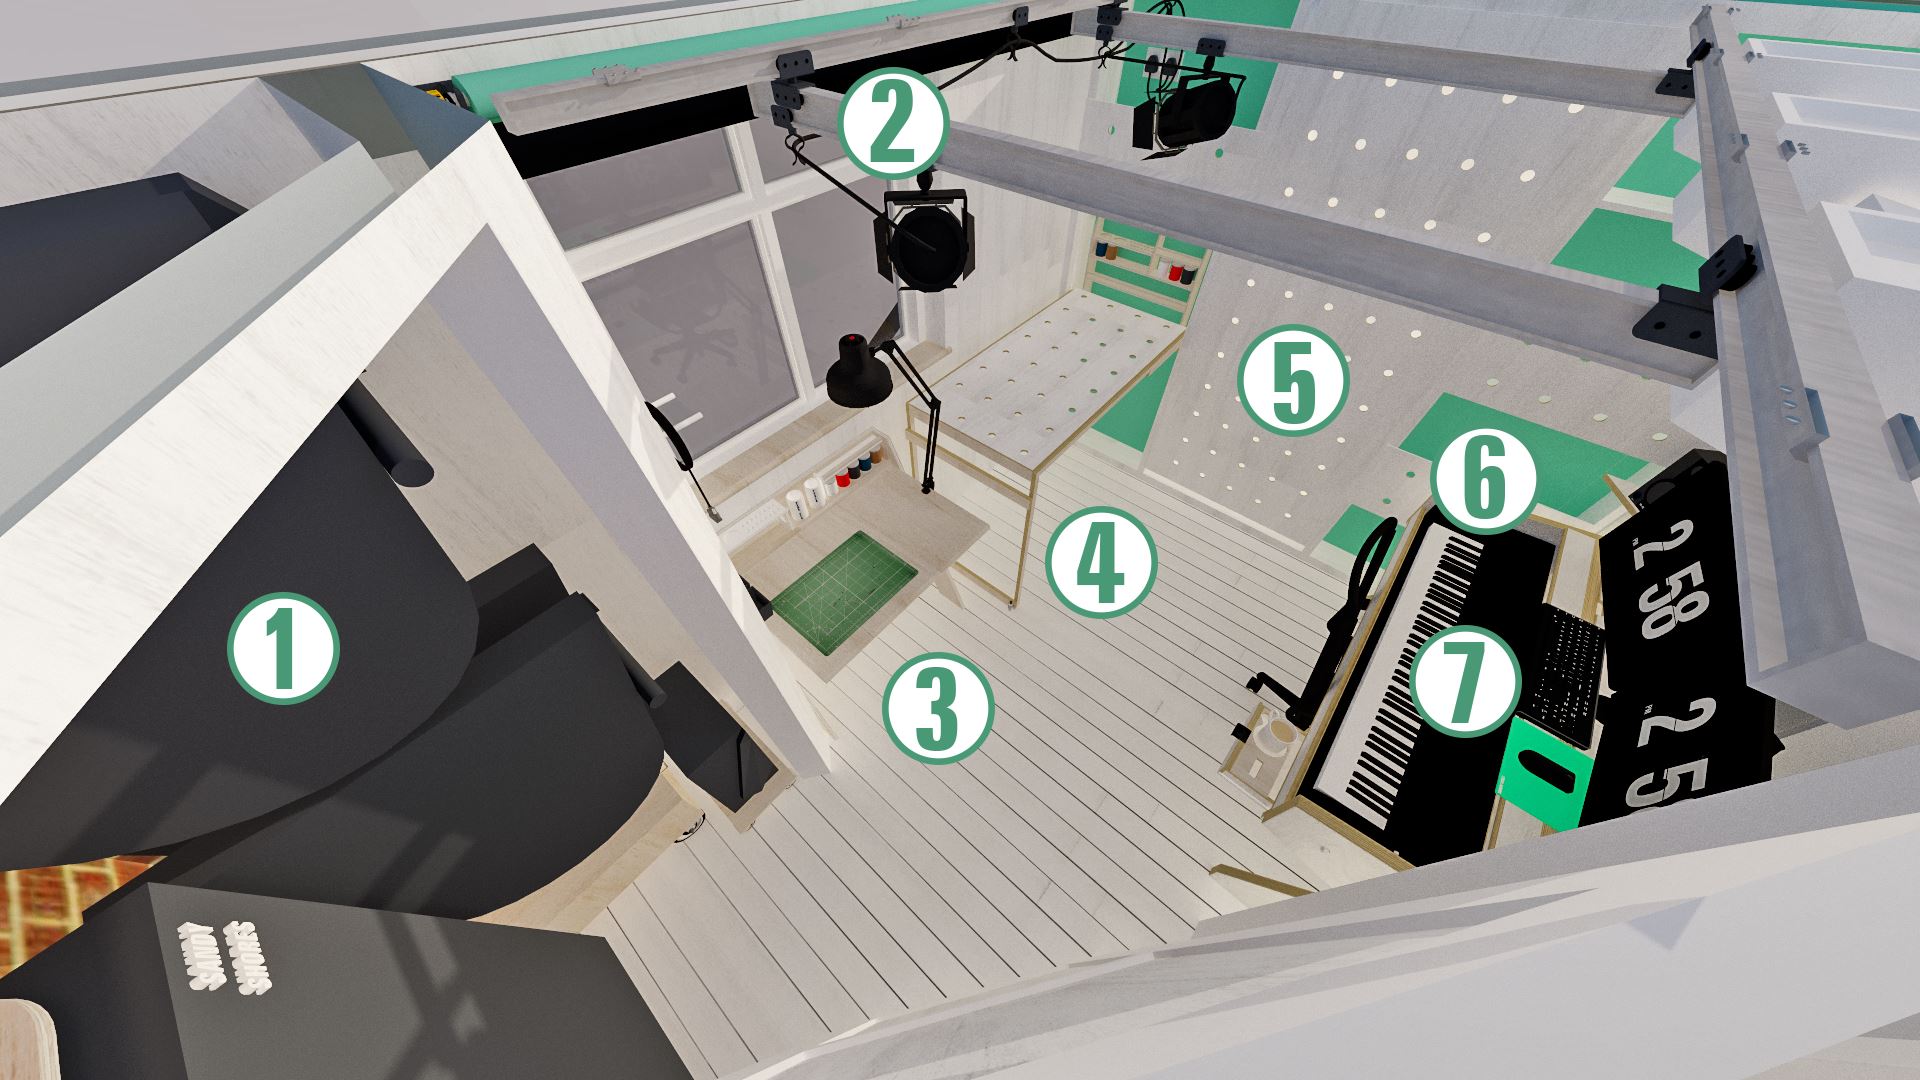 An overview, showing how the main features fit into the small space. 1 - Layout Storage/Machine Room, 2 - Lighting Gantry, 3 - Modelmaking Desk, 4 - Modelmaking/Photography Bench, 5 - Drop-down Bed or Tool Rack, 6 - Shelving and Storage, 7 - Composer's Desk.